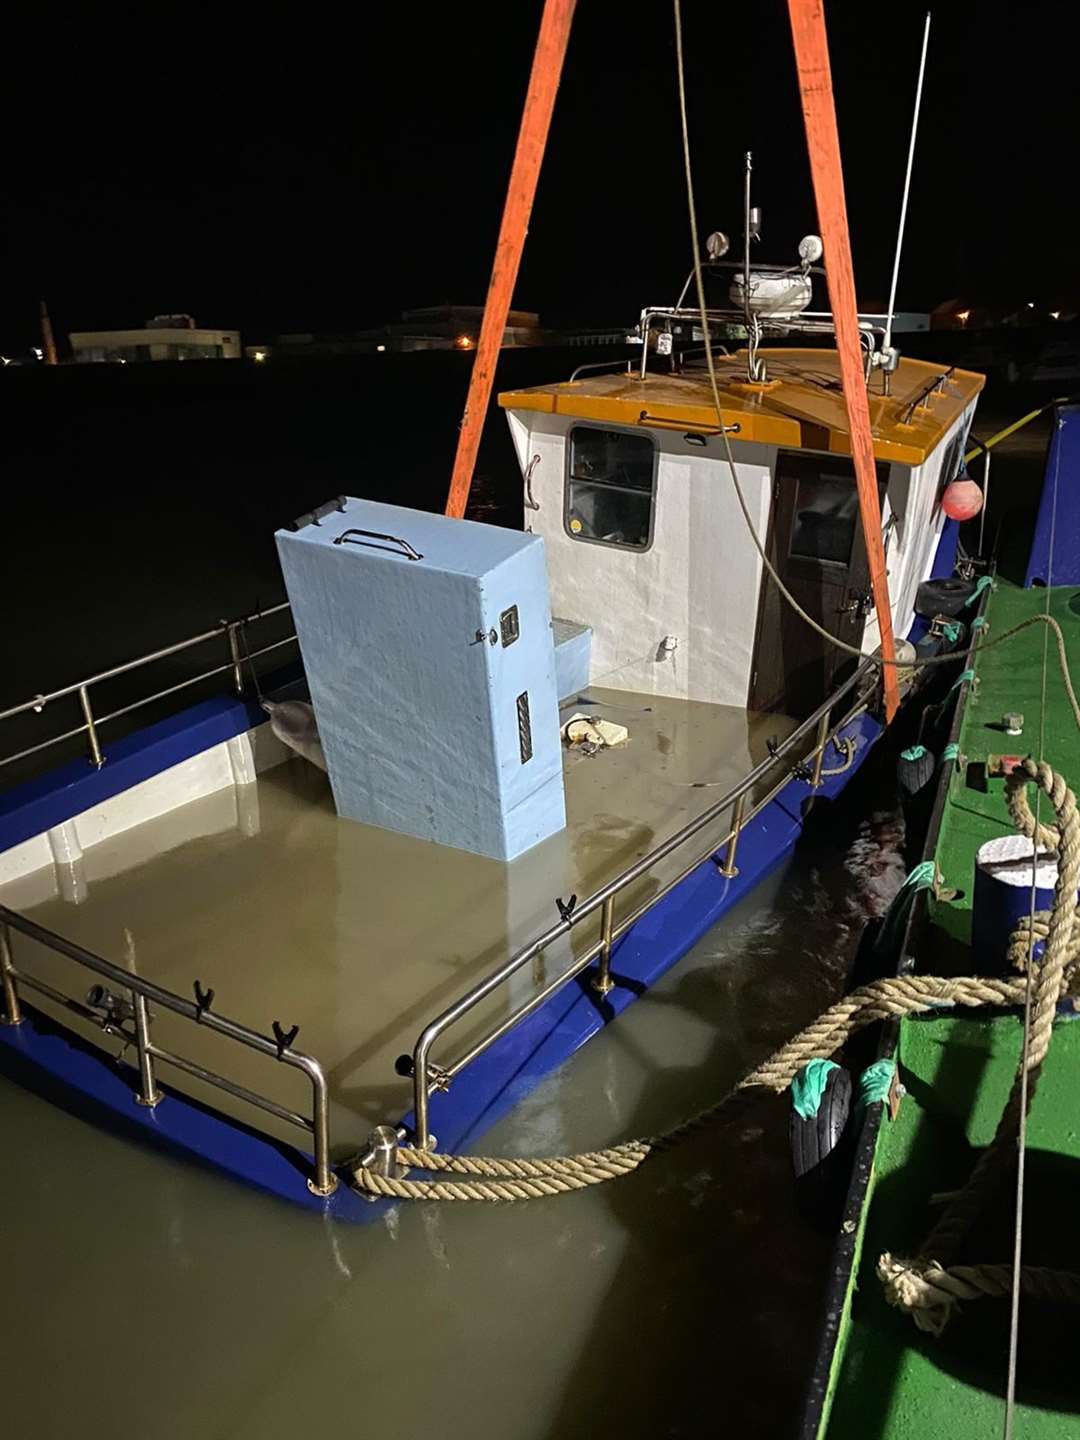 The sunk Gypsy Lea fishing boat owned by Terry Smith, 69, of Sittingbourne is salvaged by Lee Dixon, 50, of Whitstable Marine Services and his £1.9m Liftmoor floating crane. Picture: Whitstable Marine Services